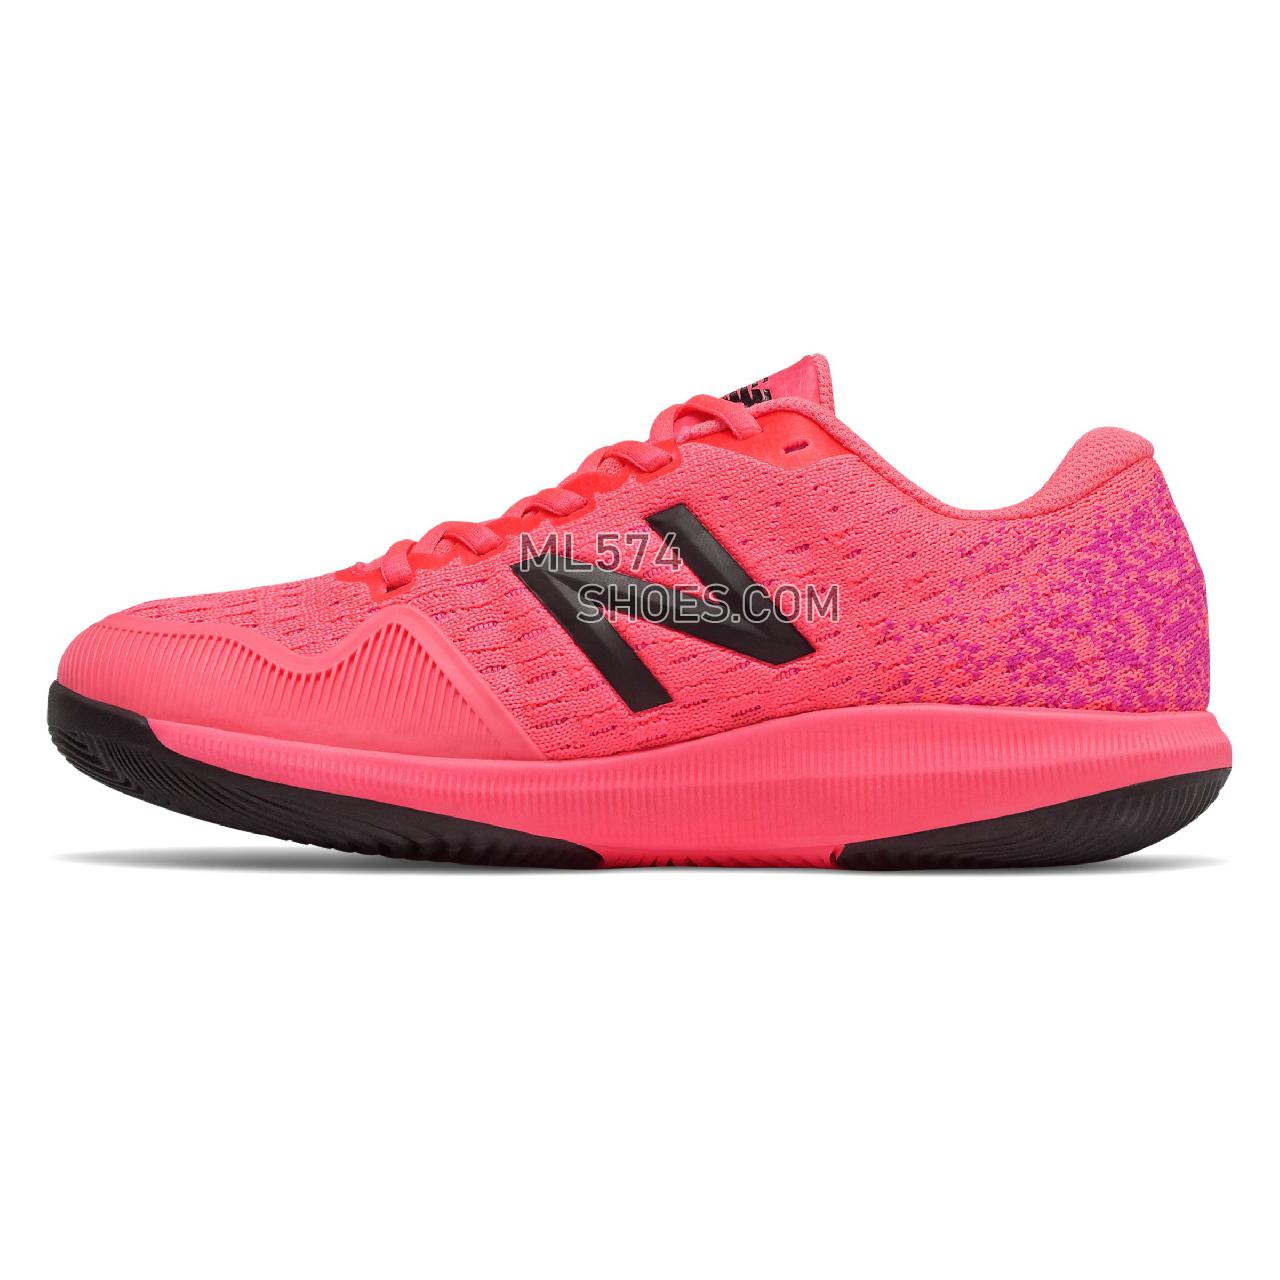 New Balance FuelCell 996v4 - Women's Tennis - Guava with Black - WCH996G4